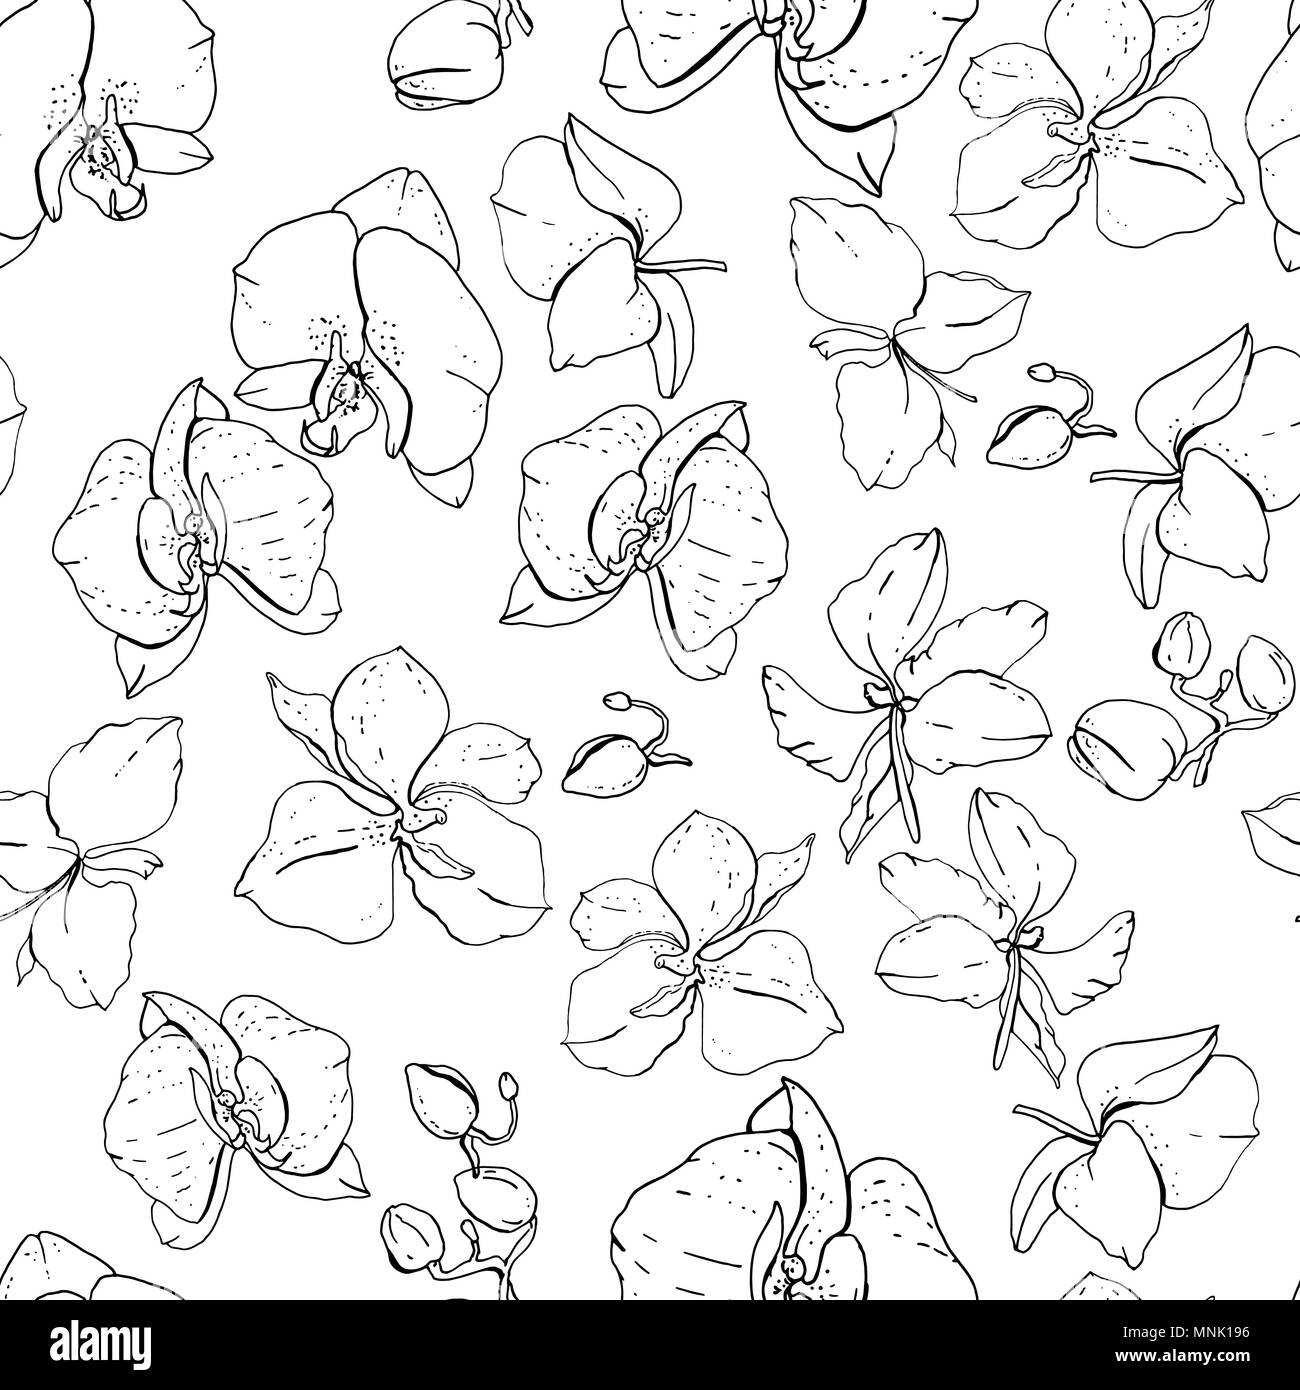 Seamless floral pattern with romantic flowers. Stock Vector